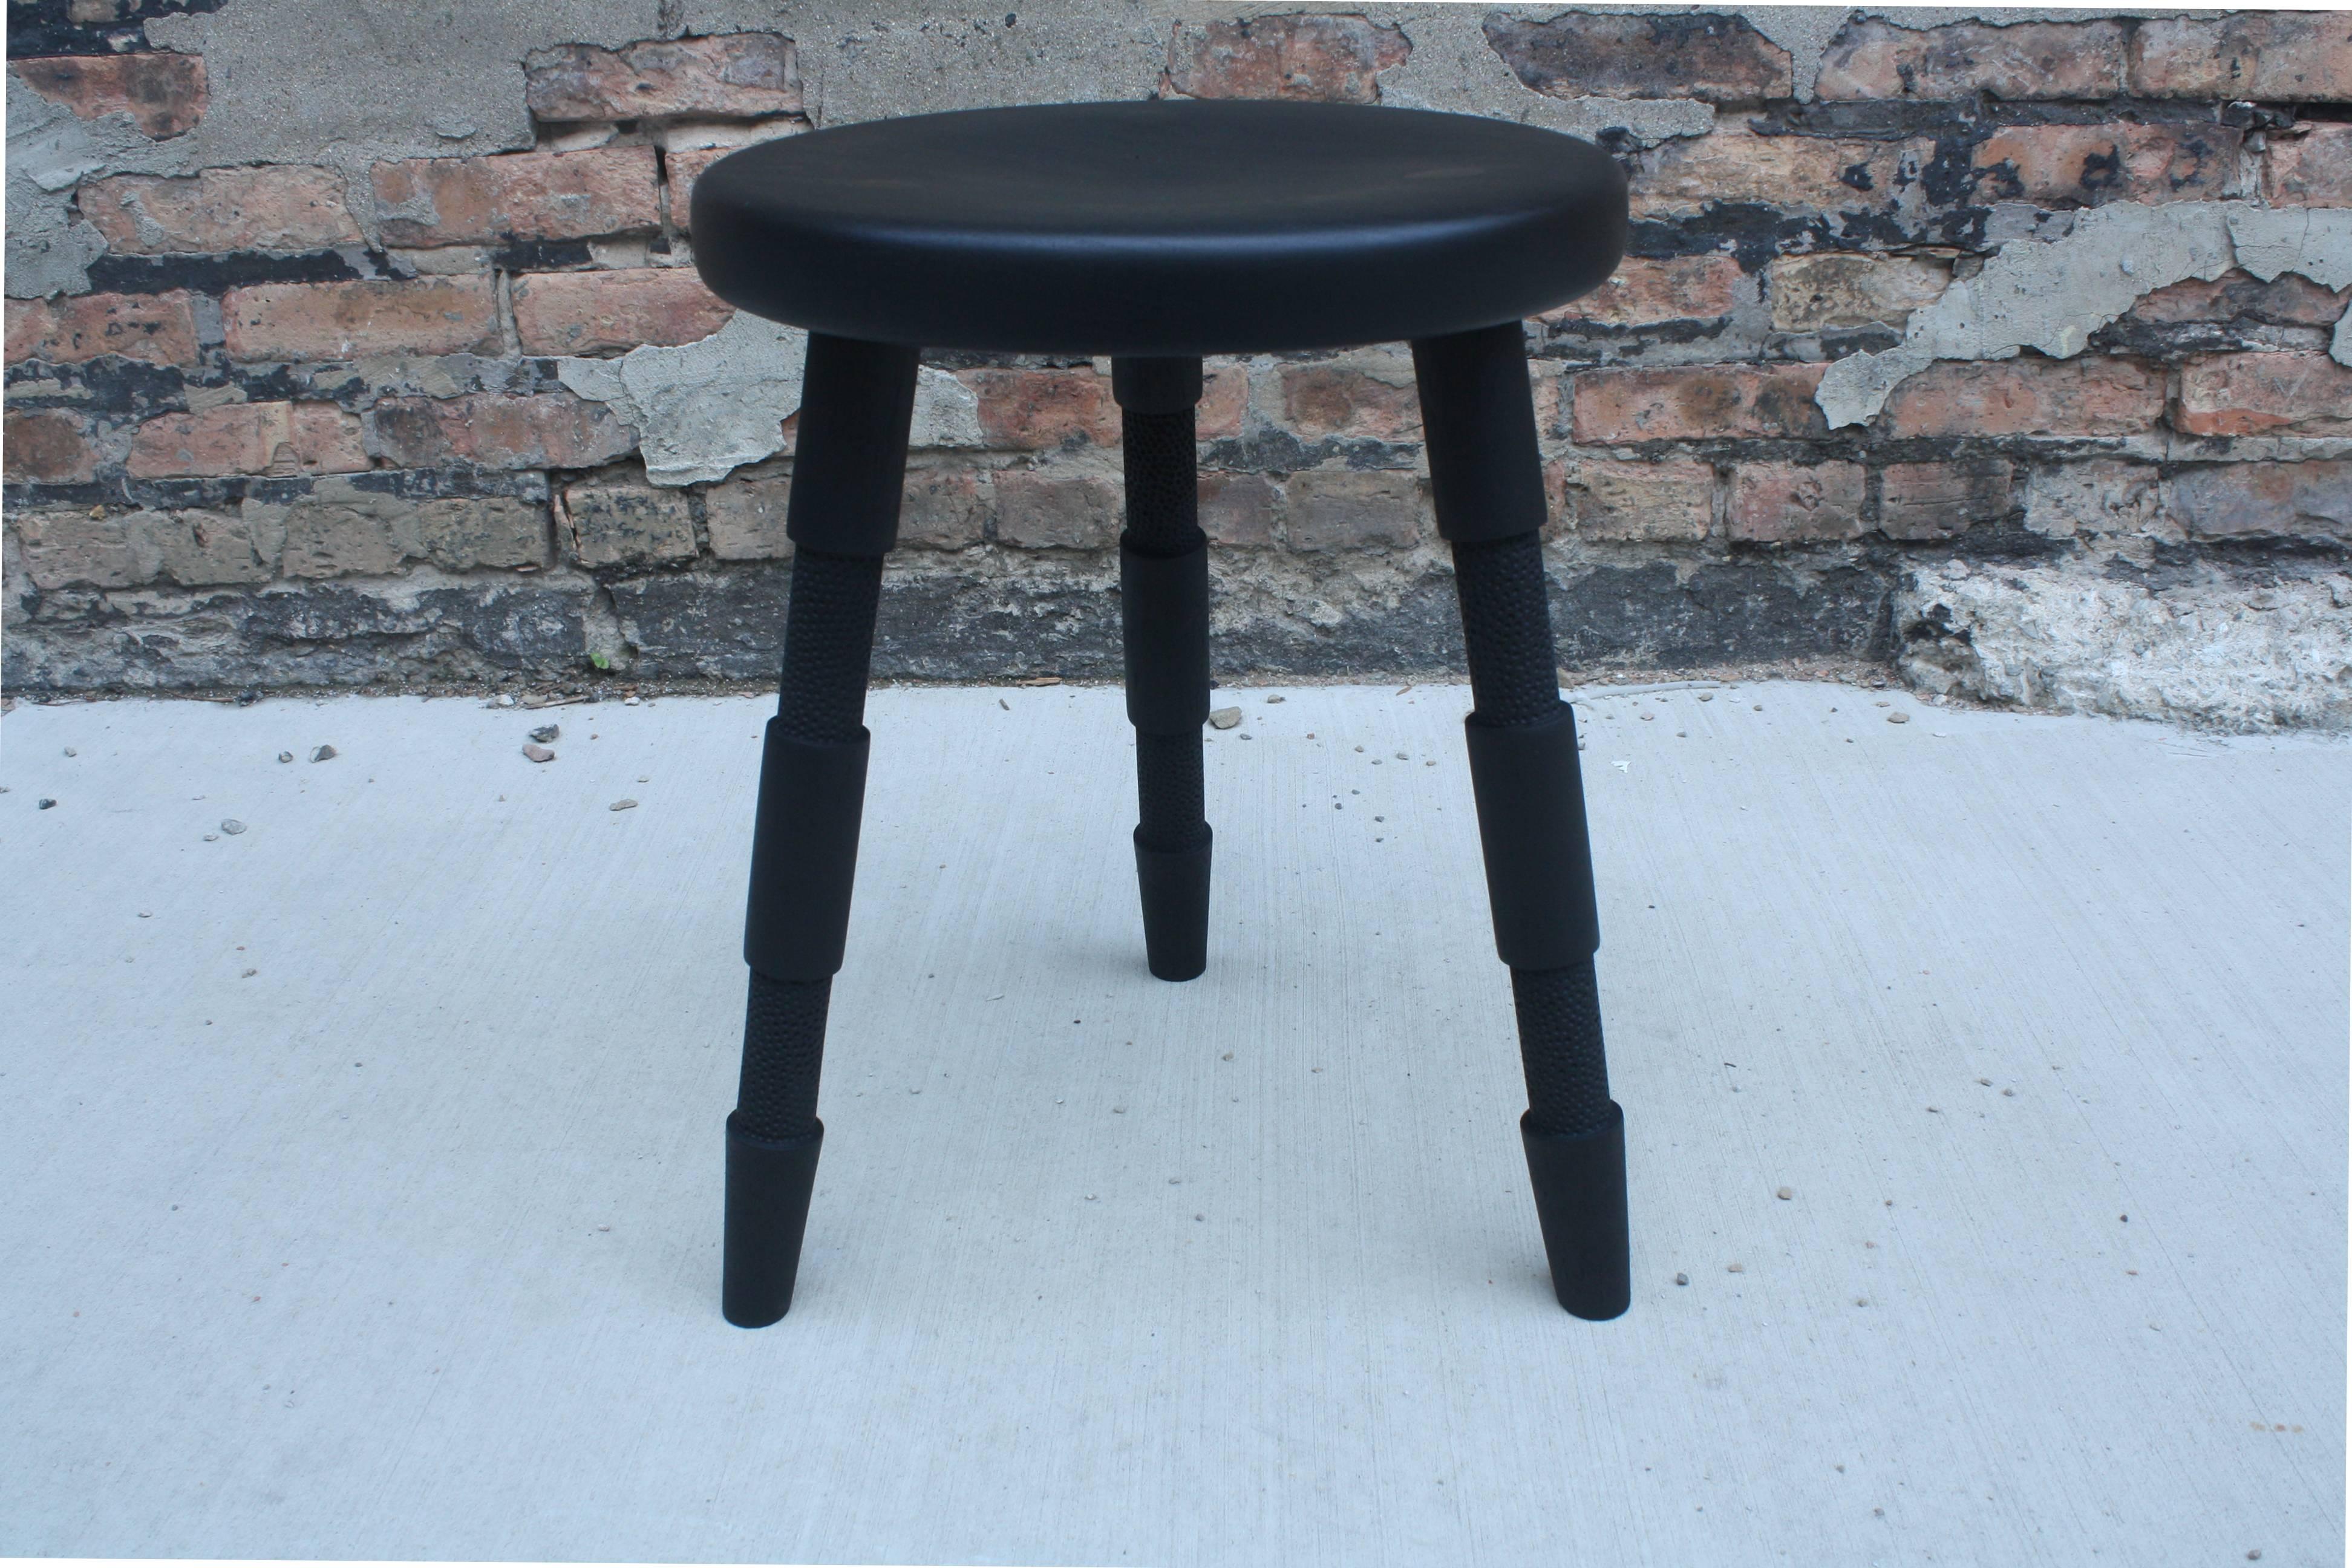 Ebonized Saddle, Handmade Wood Stool with Textured Legs and a Carved Seat For Sale